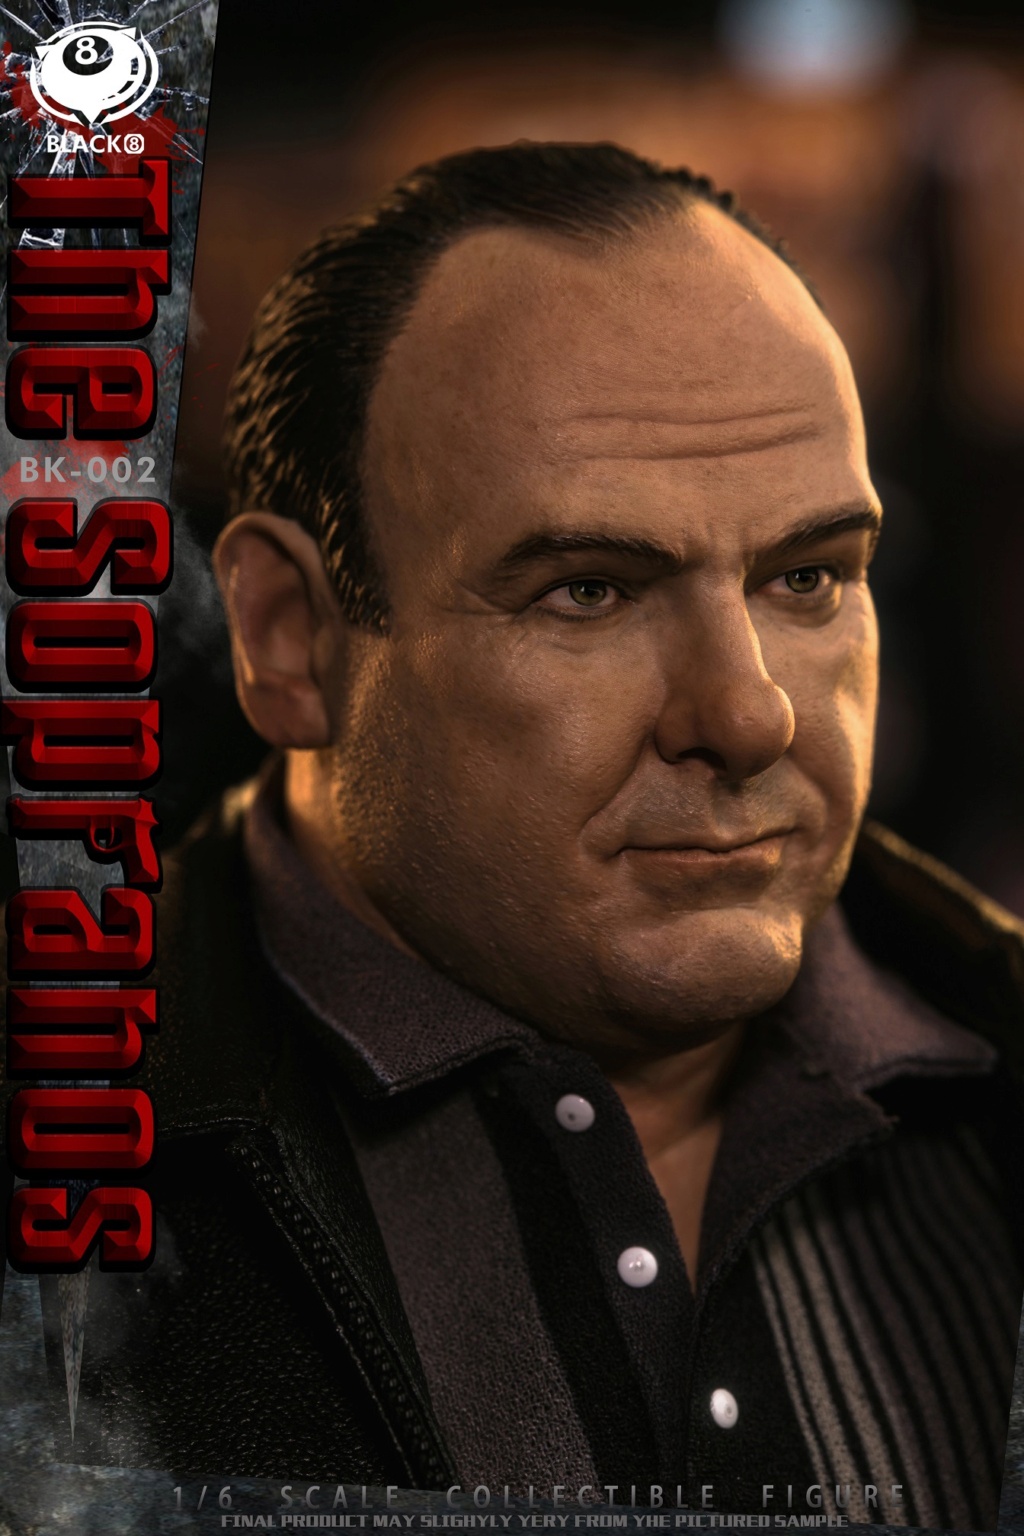 NEW PRODUCT: BLACK 8 STUDIO: 1/6 "The Sopranos" Collection Doll#BK-002 16111011